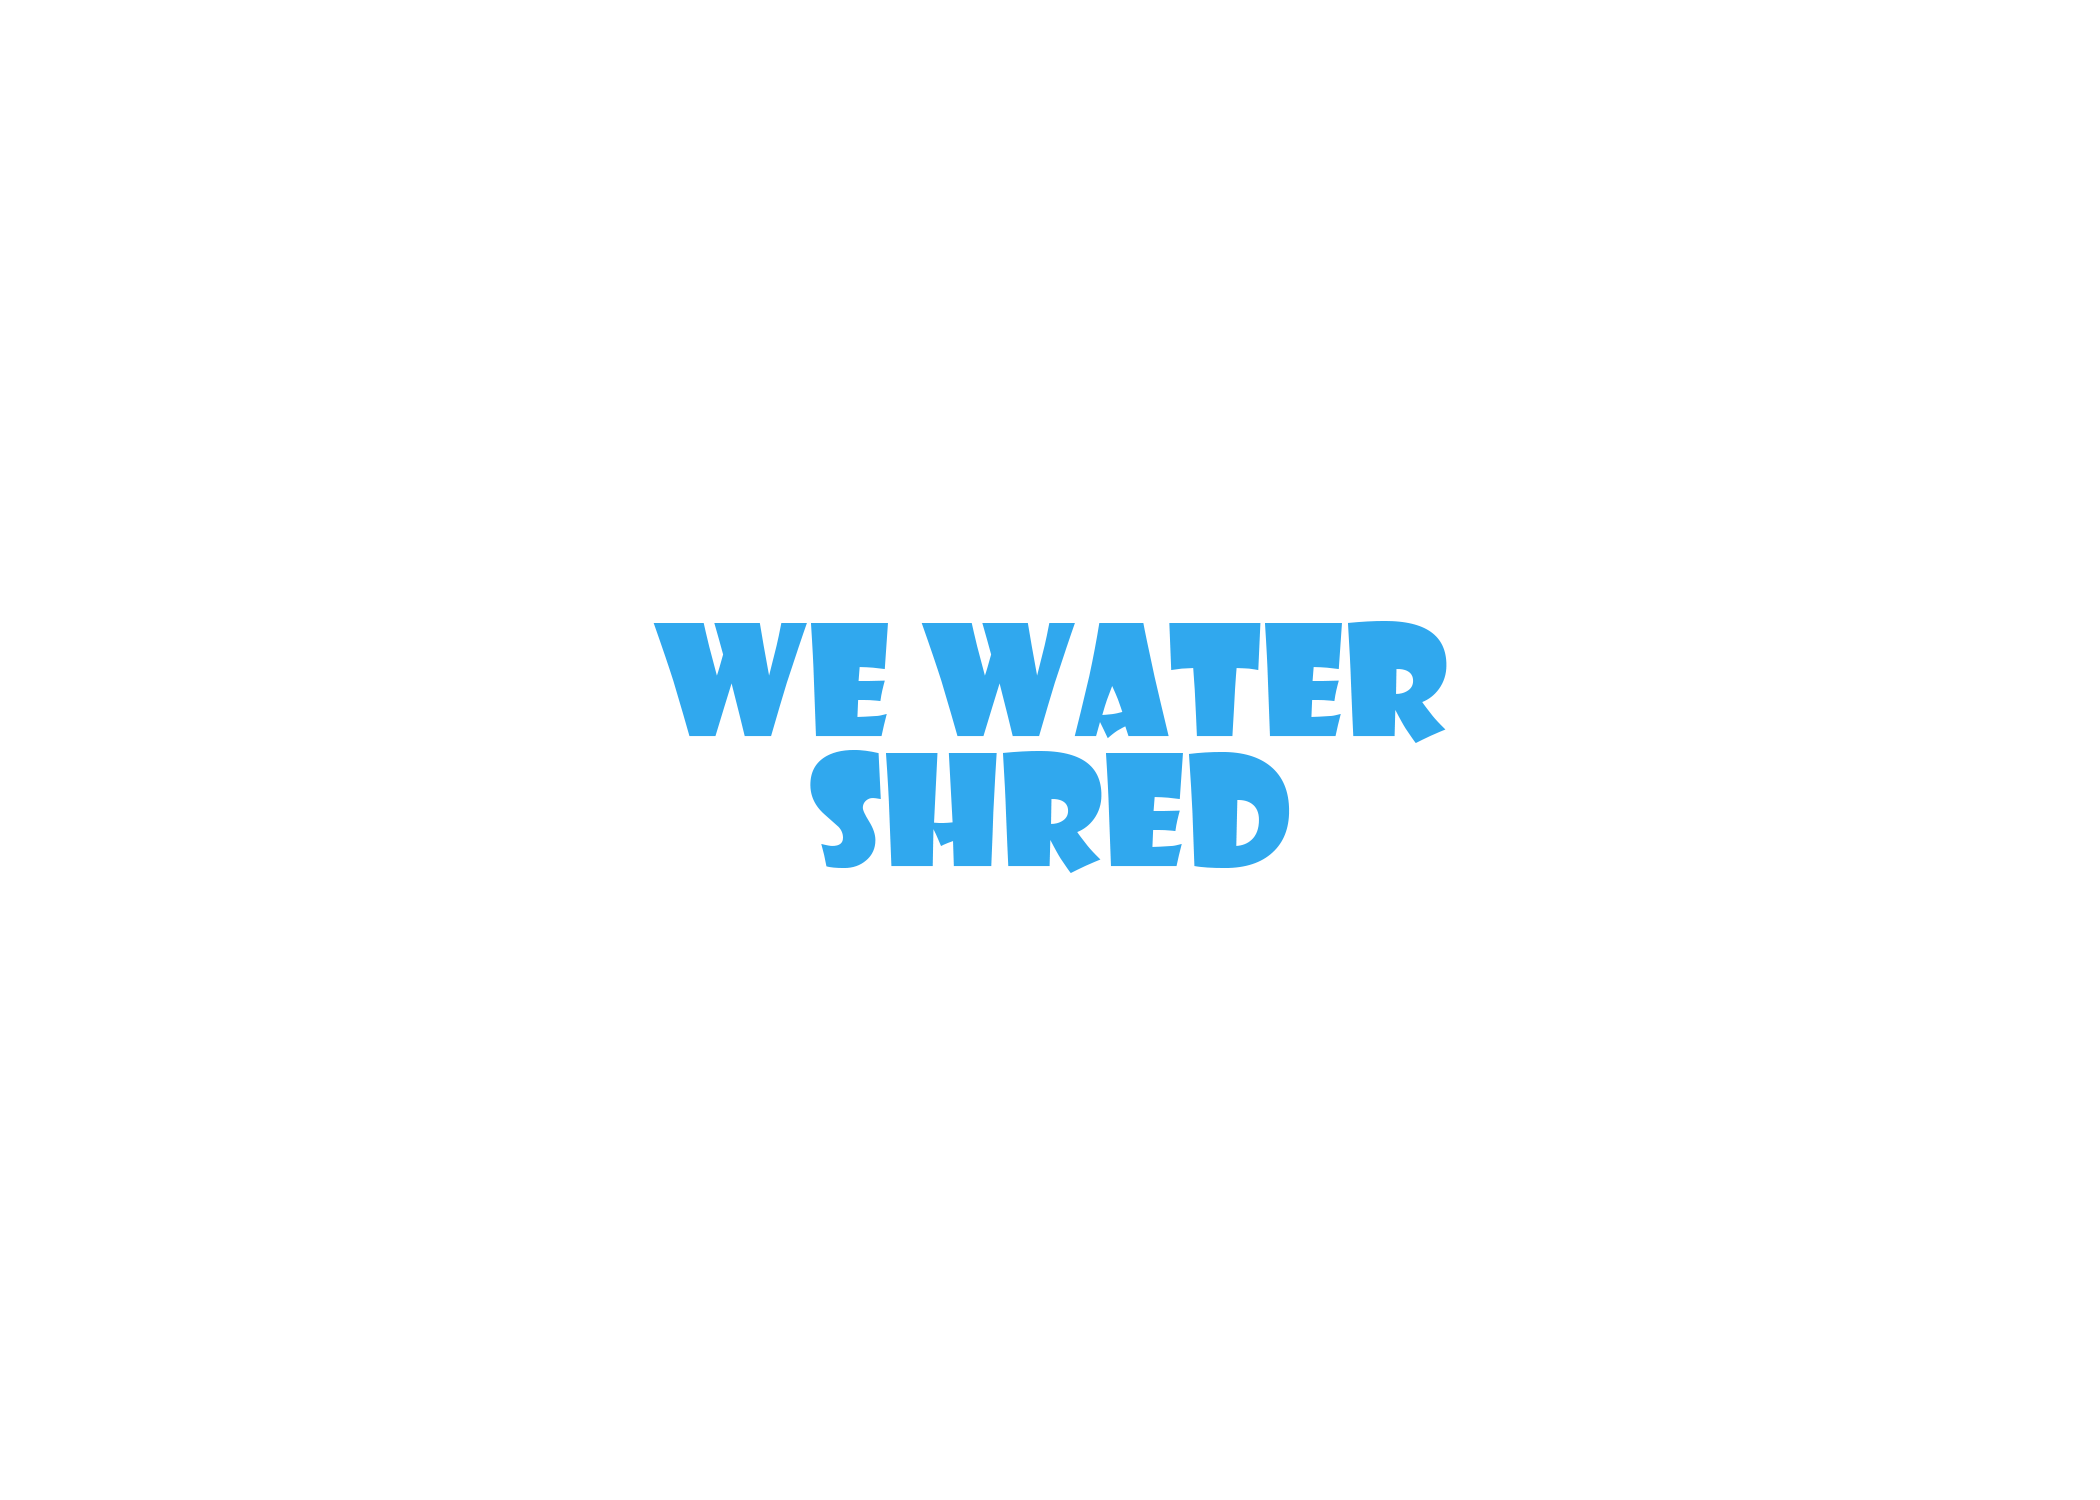 We Water Shred